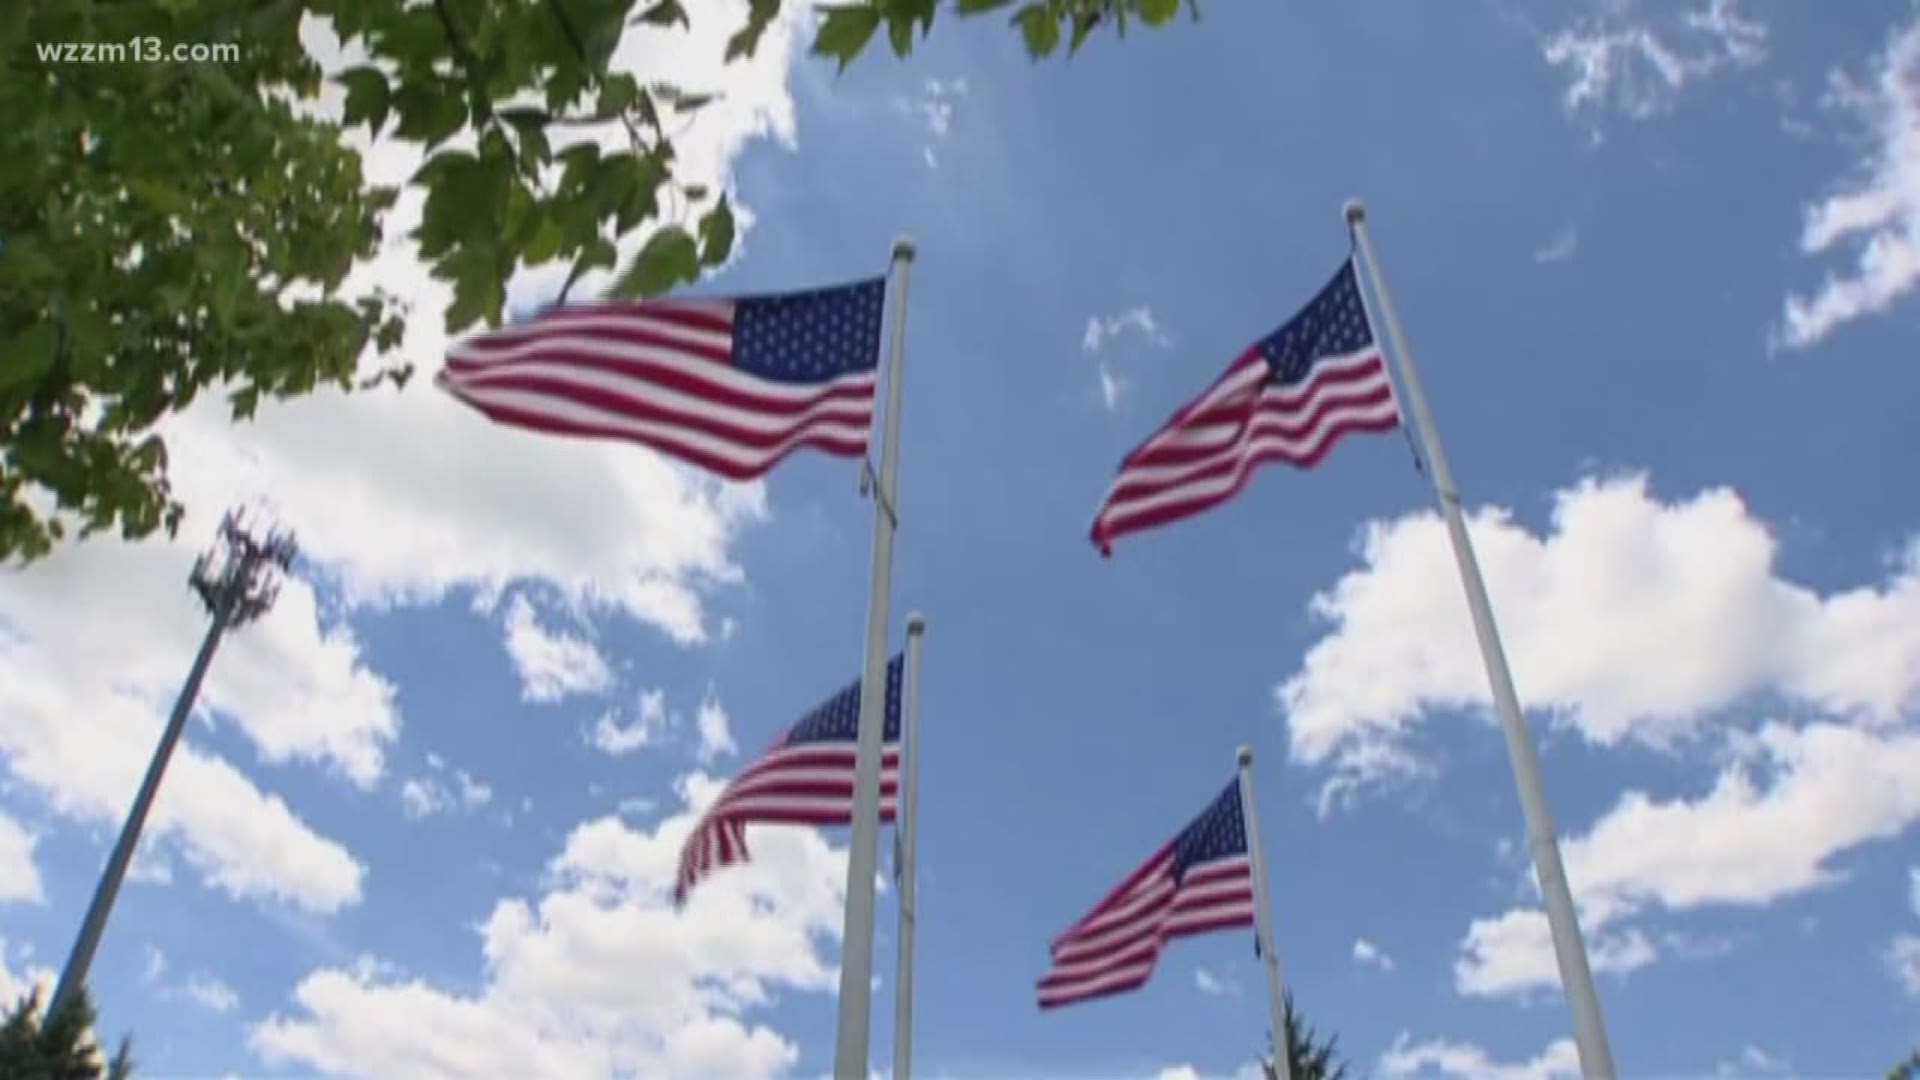 Verify: Does the flag code penalize people who do not follow it?